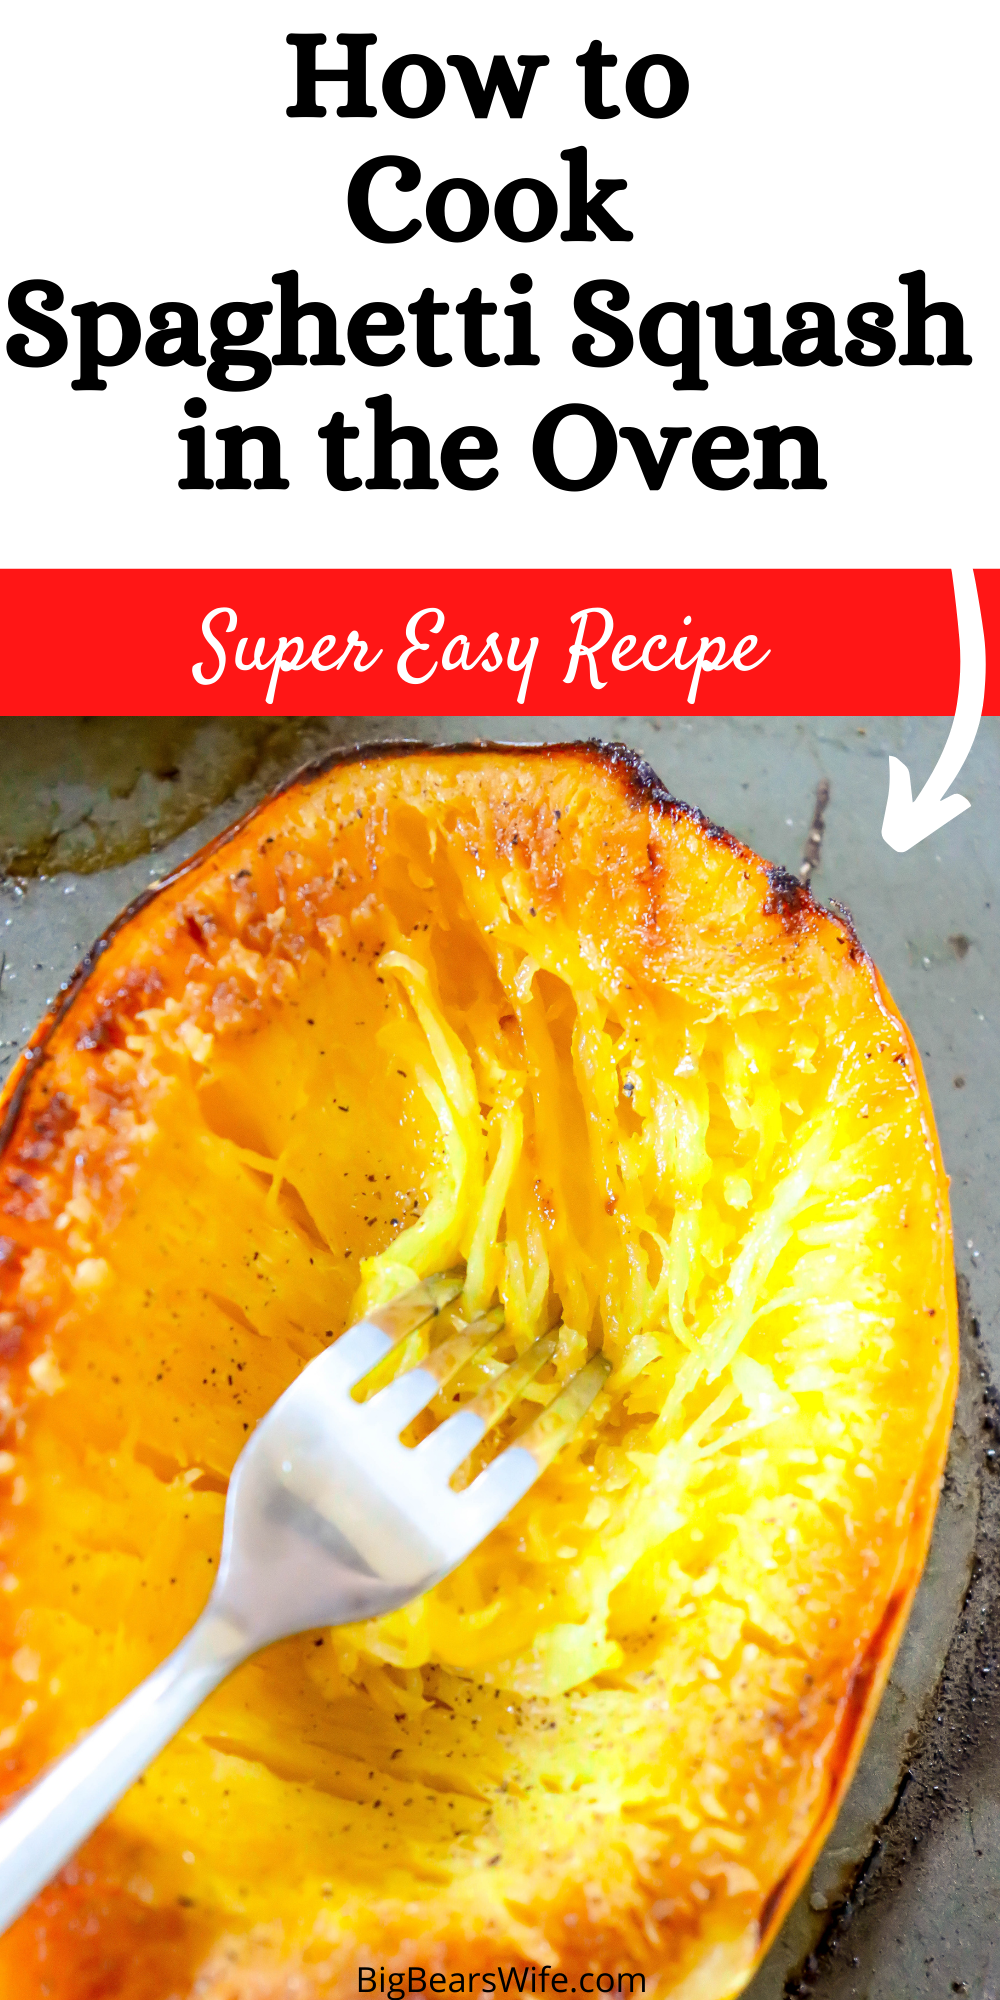 Trying to learn How to Cook Spaghetti Squash in the Oven? I'll show you how I love to cook prep and cook Spaghetti Squash! via @bigbearswife